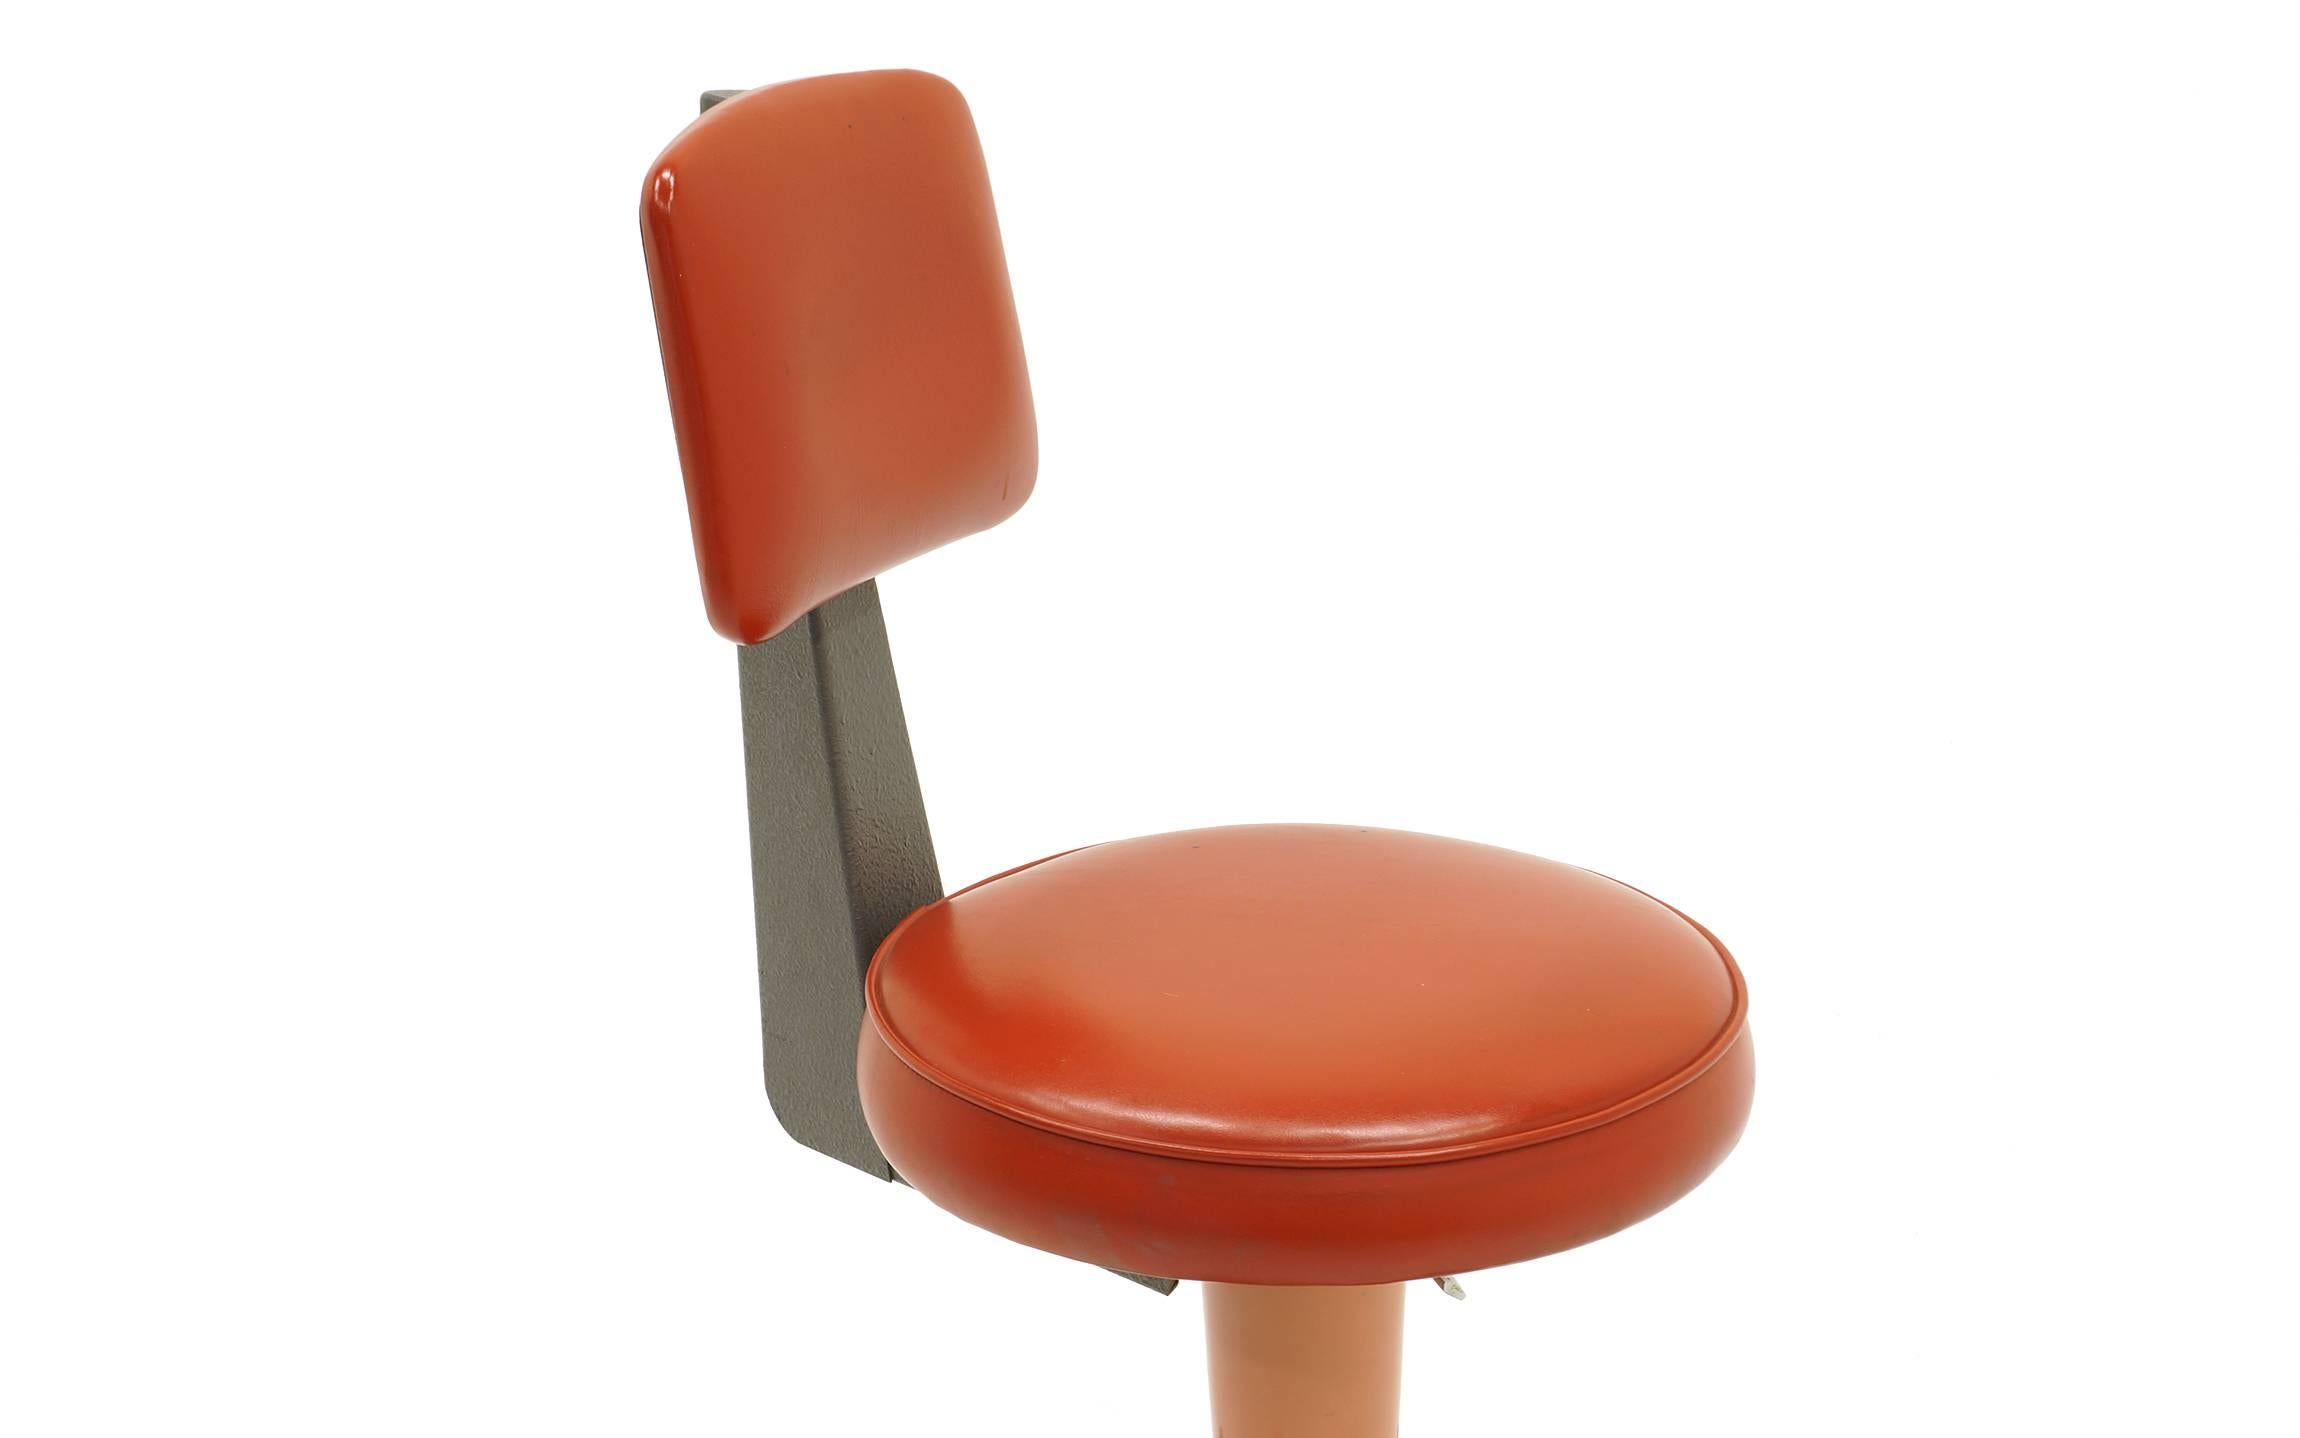 Mid-20th Century Industrial Design Swivel Chair on Casters by American Optical Corp Red Orange